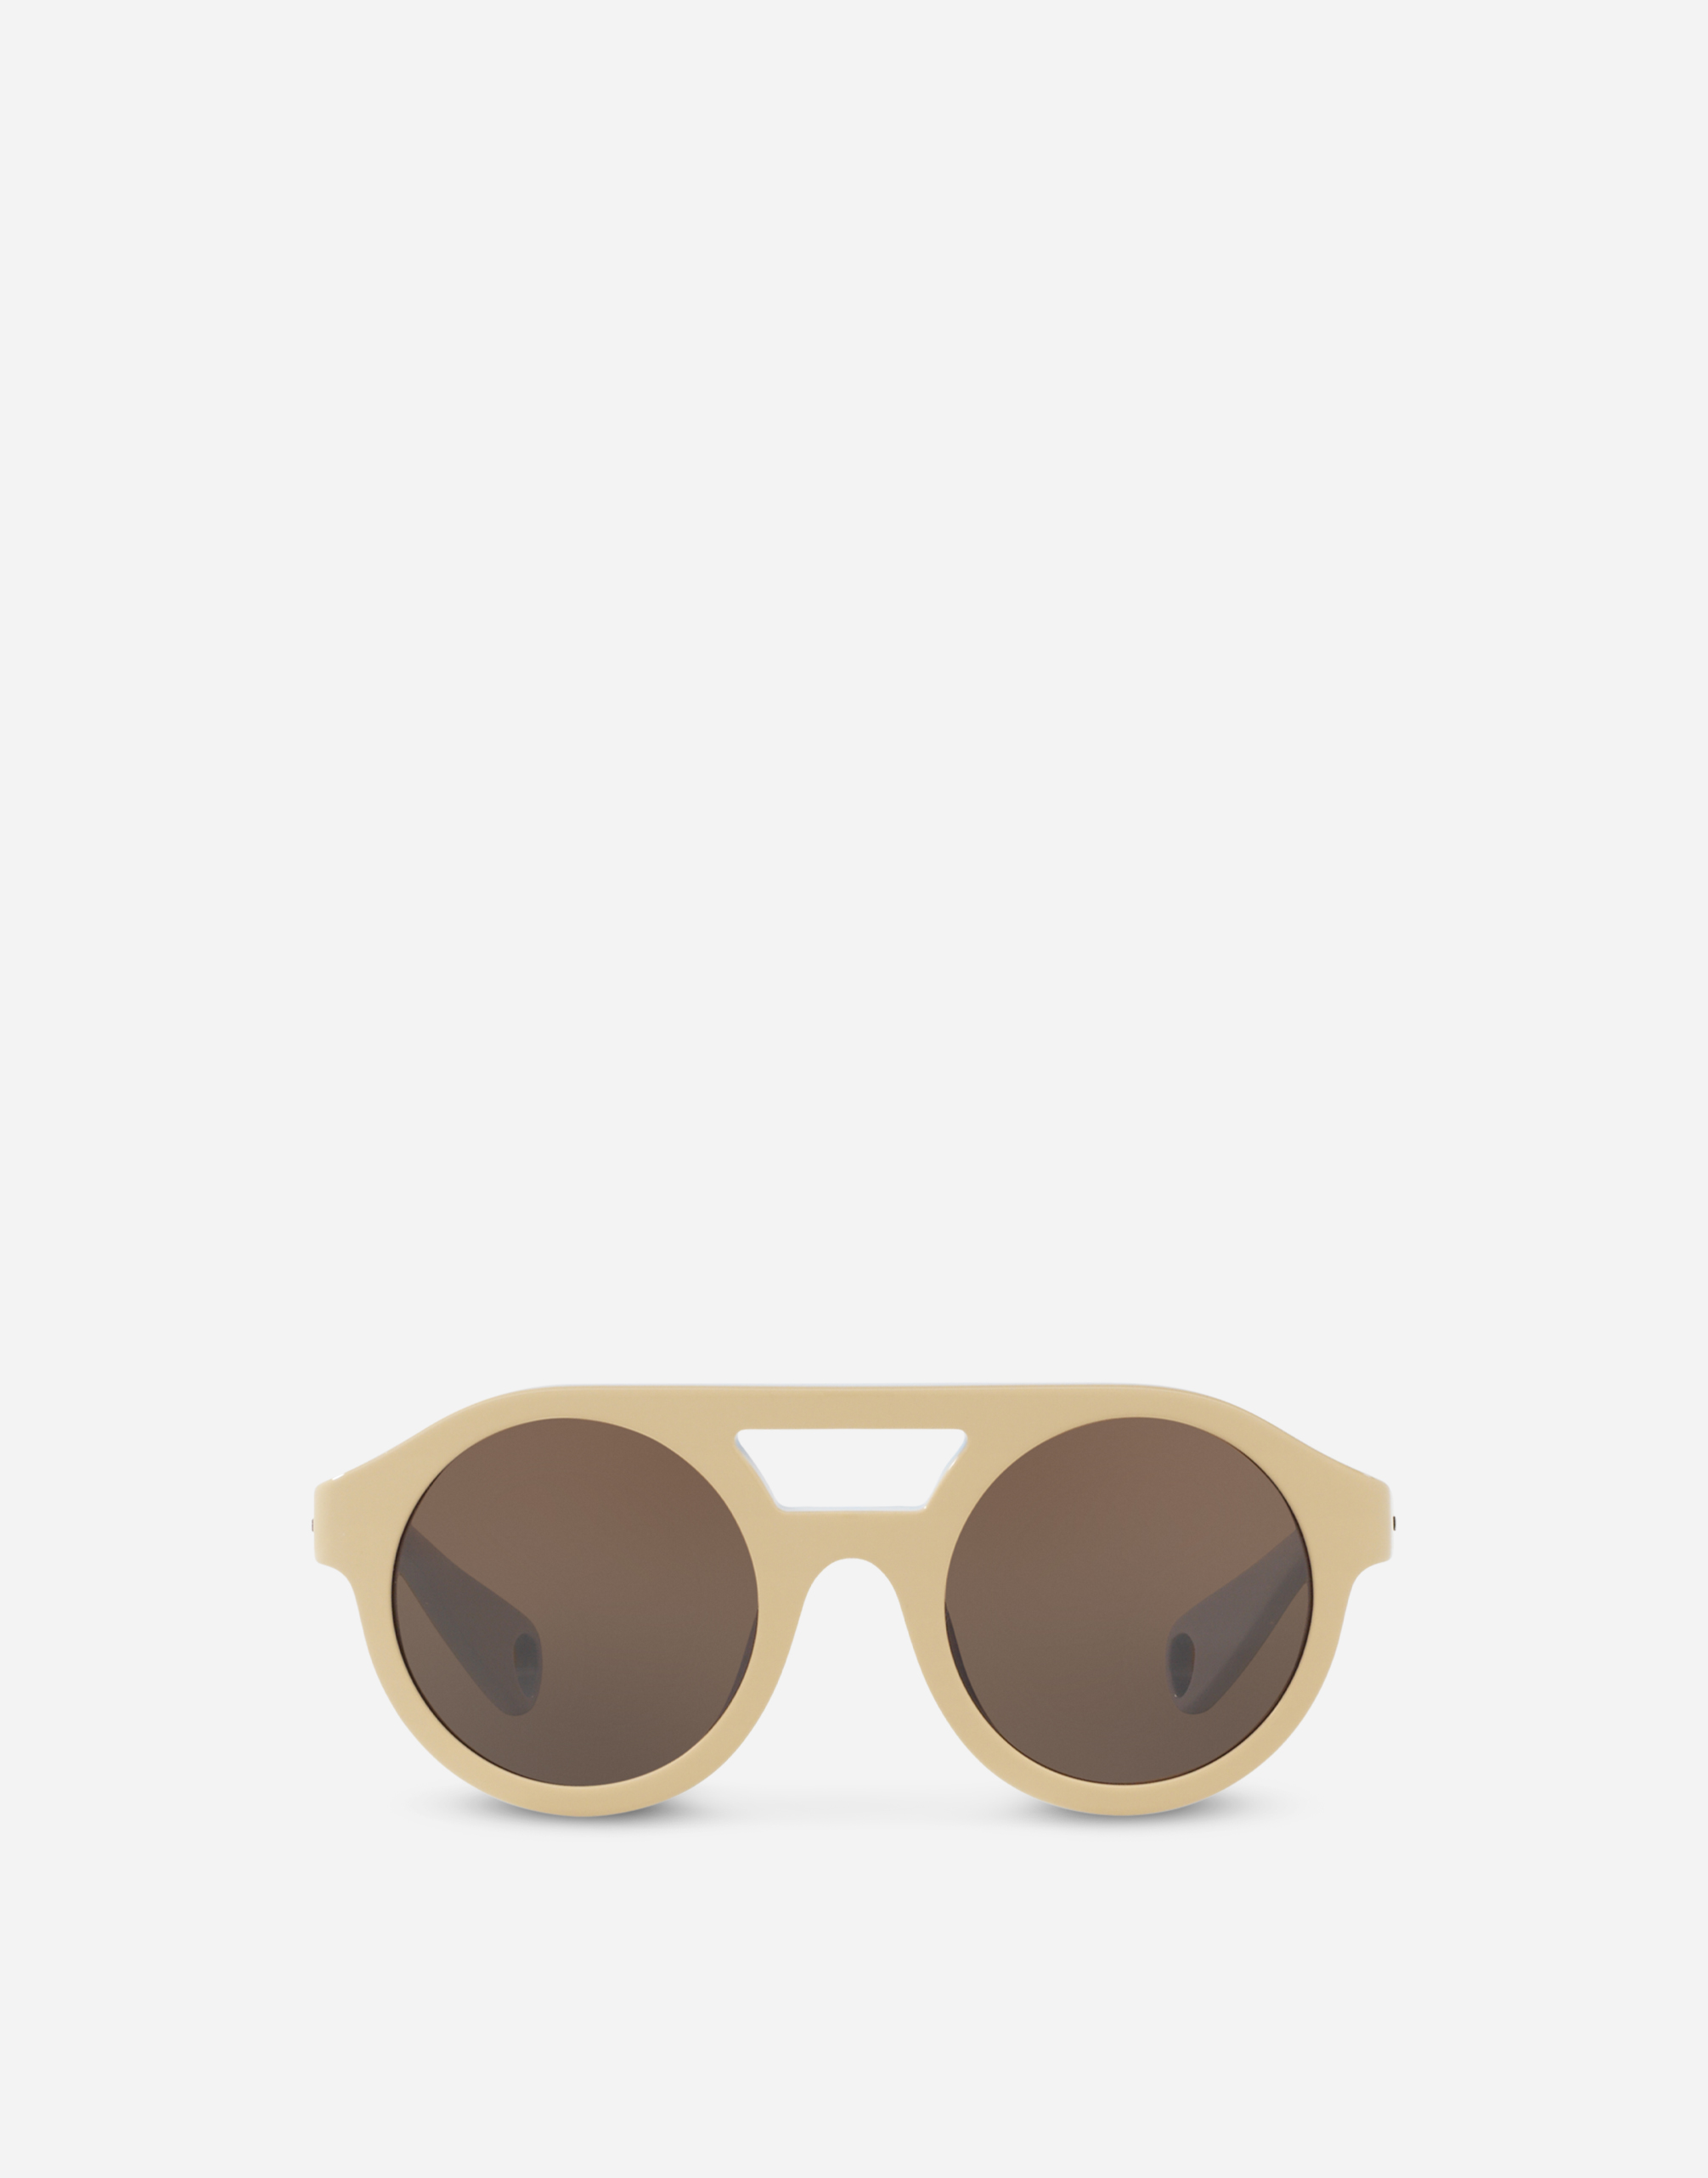 Mimmo sunglasses in Beige and Light Blue